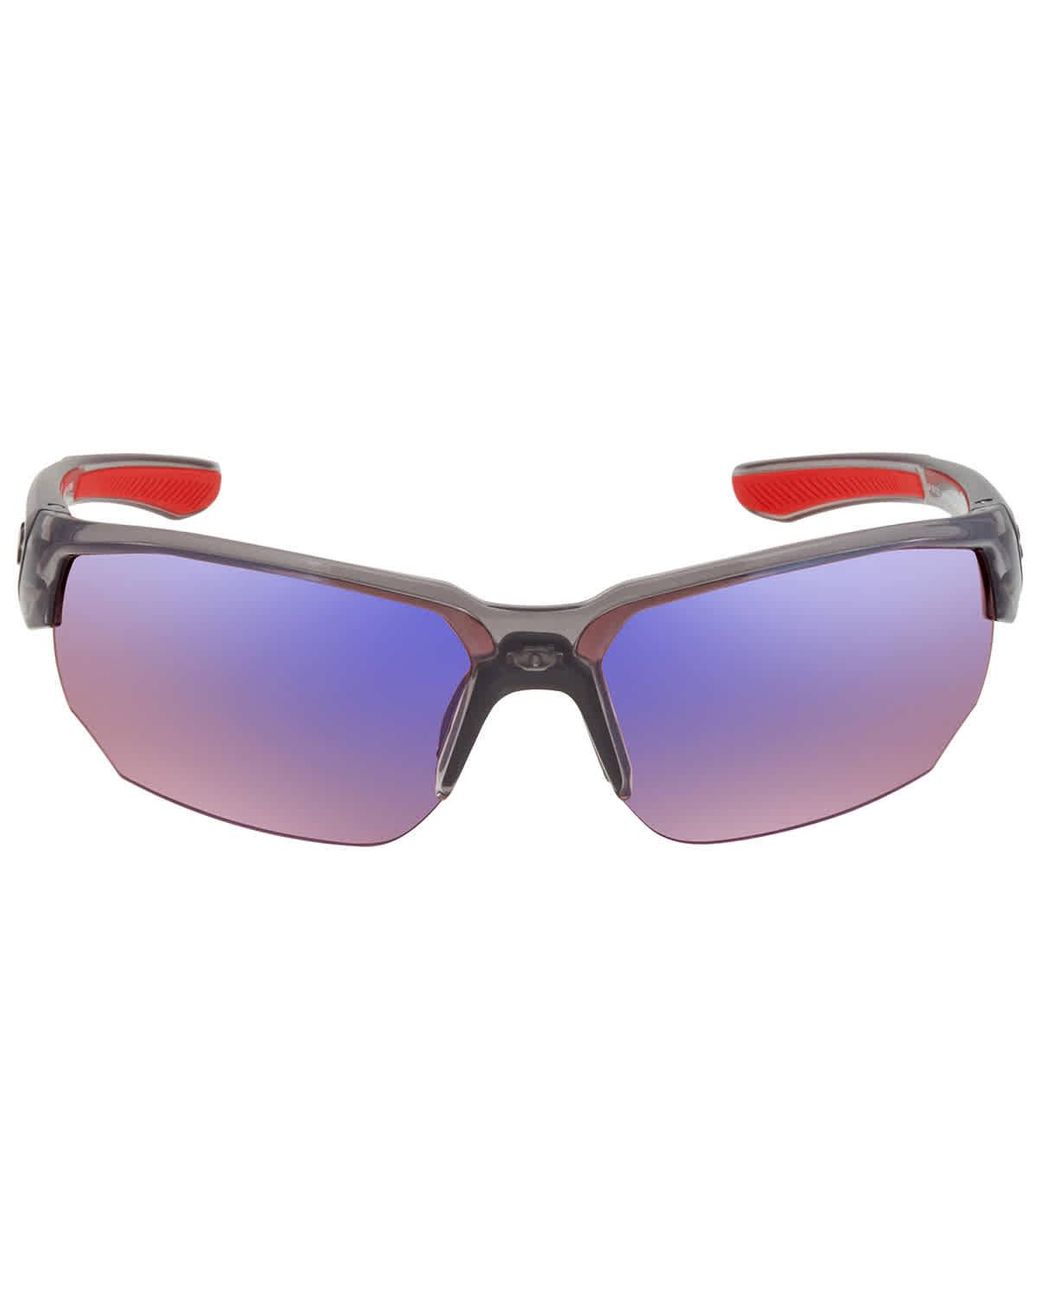 Under Armour Playmaker Jr Sunglasses with Transparent Grey Frame and Green  Lens